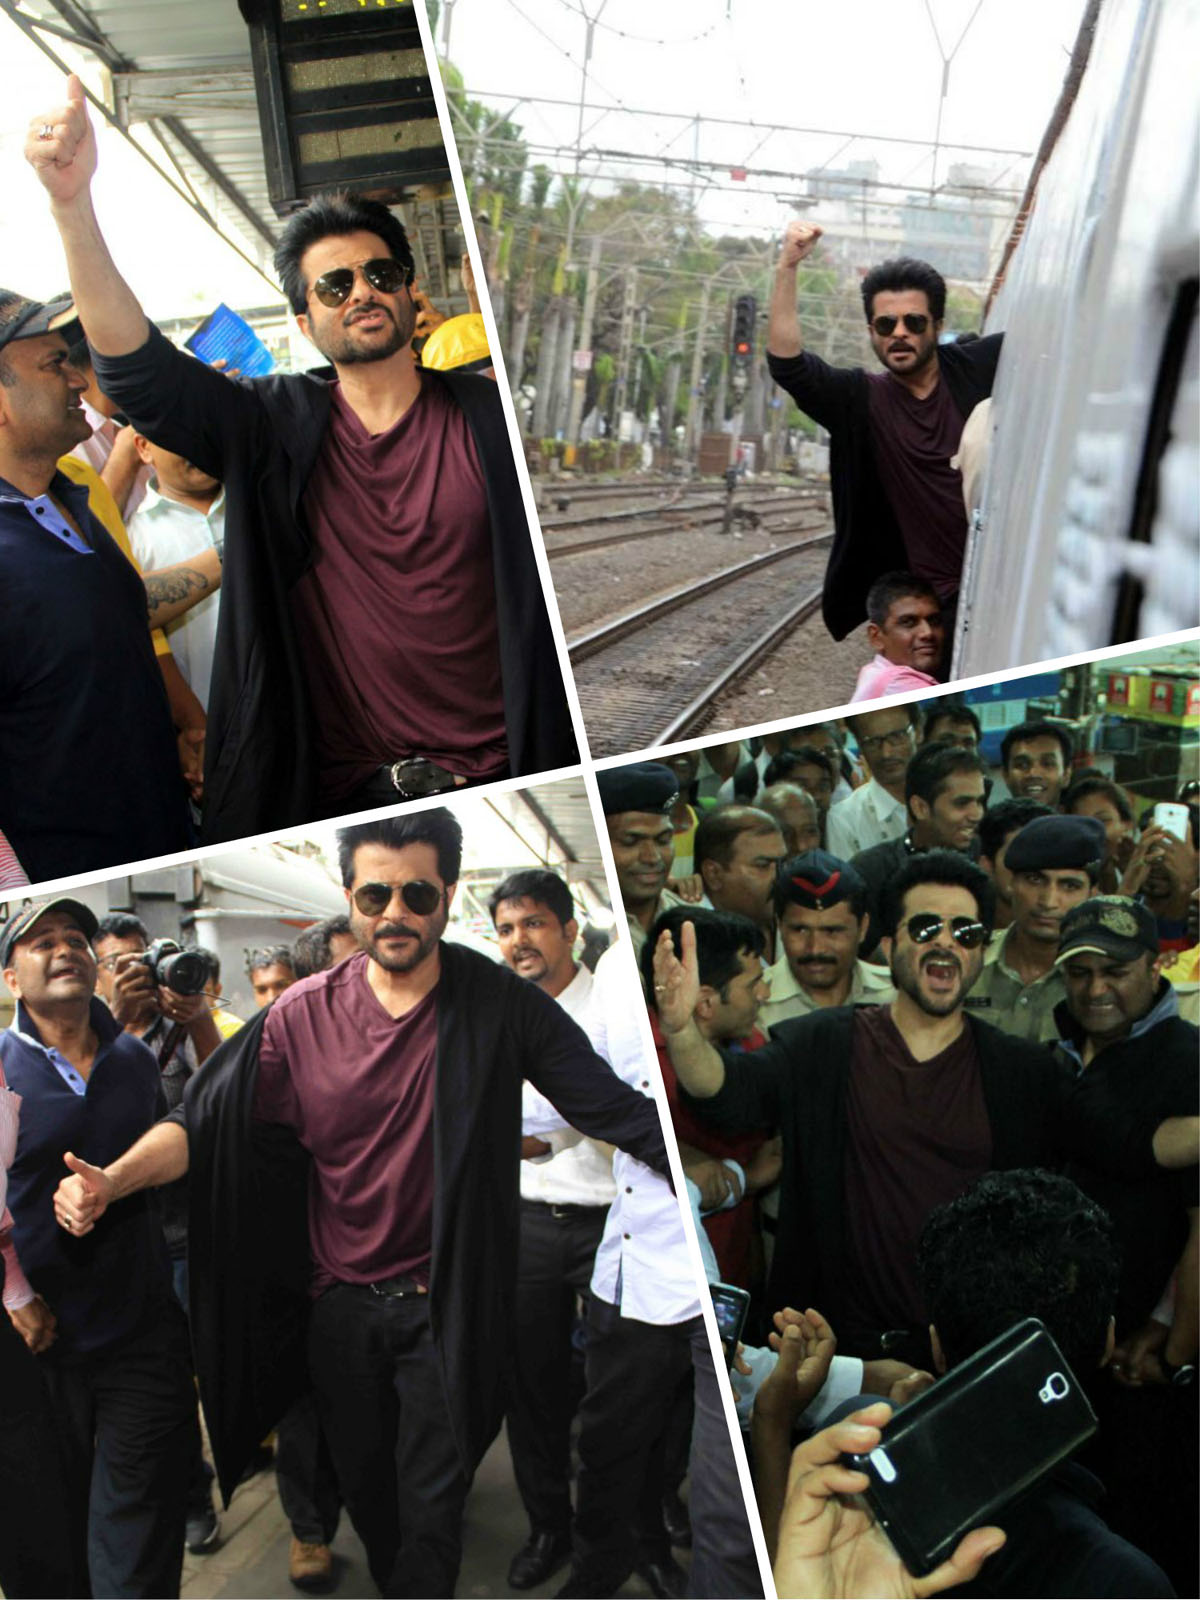 Anil Kapoor lunging out of a Mumbai local train during promotions for 24. - collage